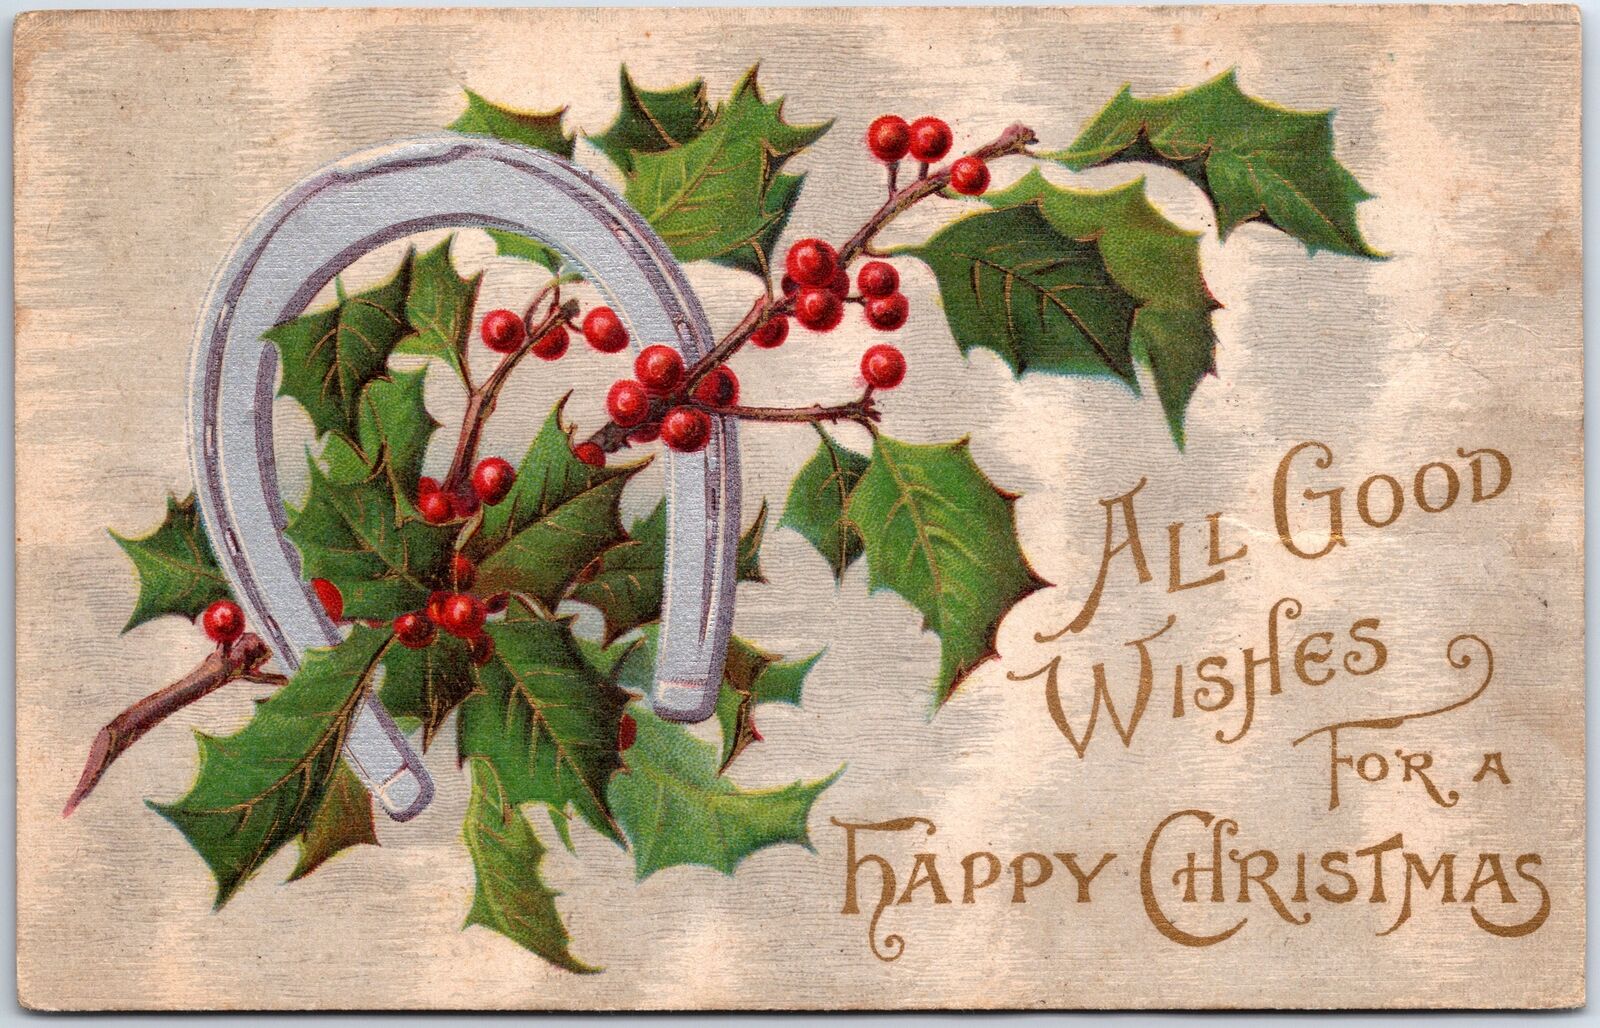 VINTAGE POSTCARD ALL GOOD WISHES FOR A MERRY CHRISTMAS MAILED HARRISON OHIO 1910